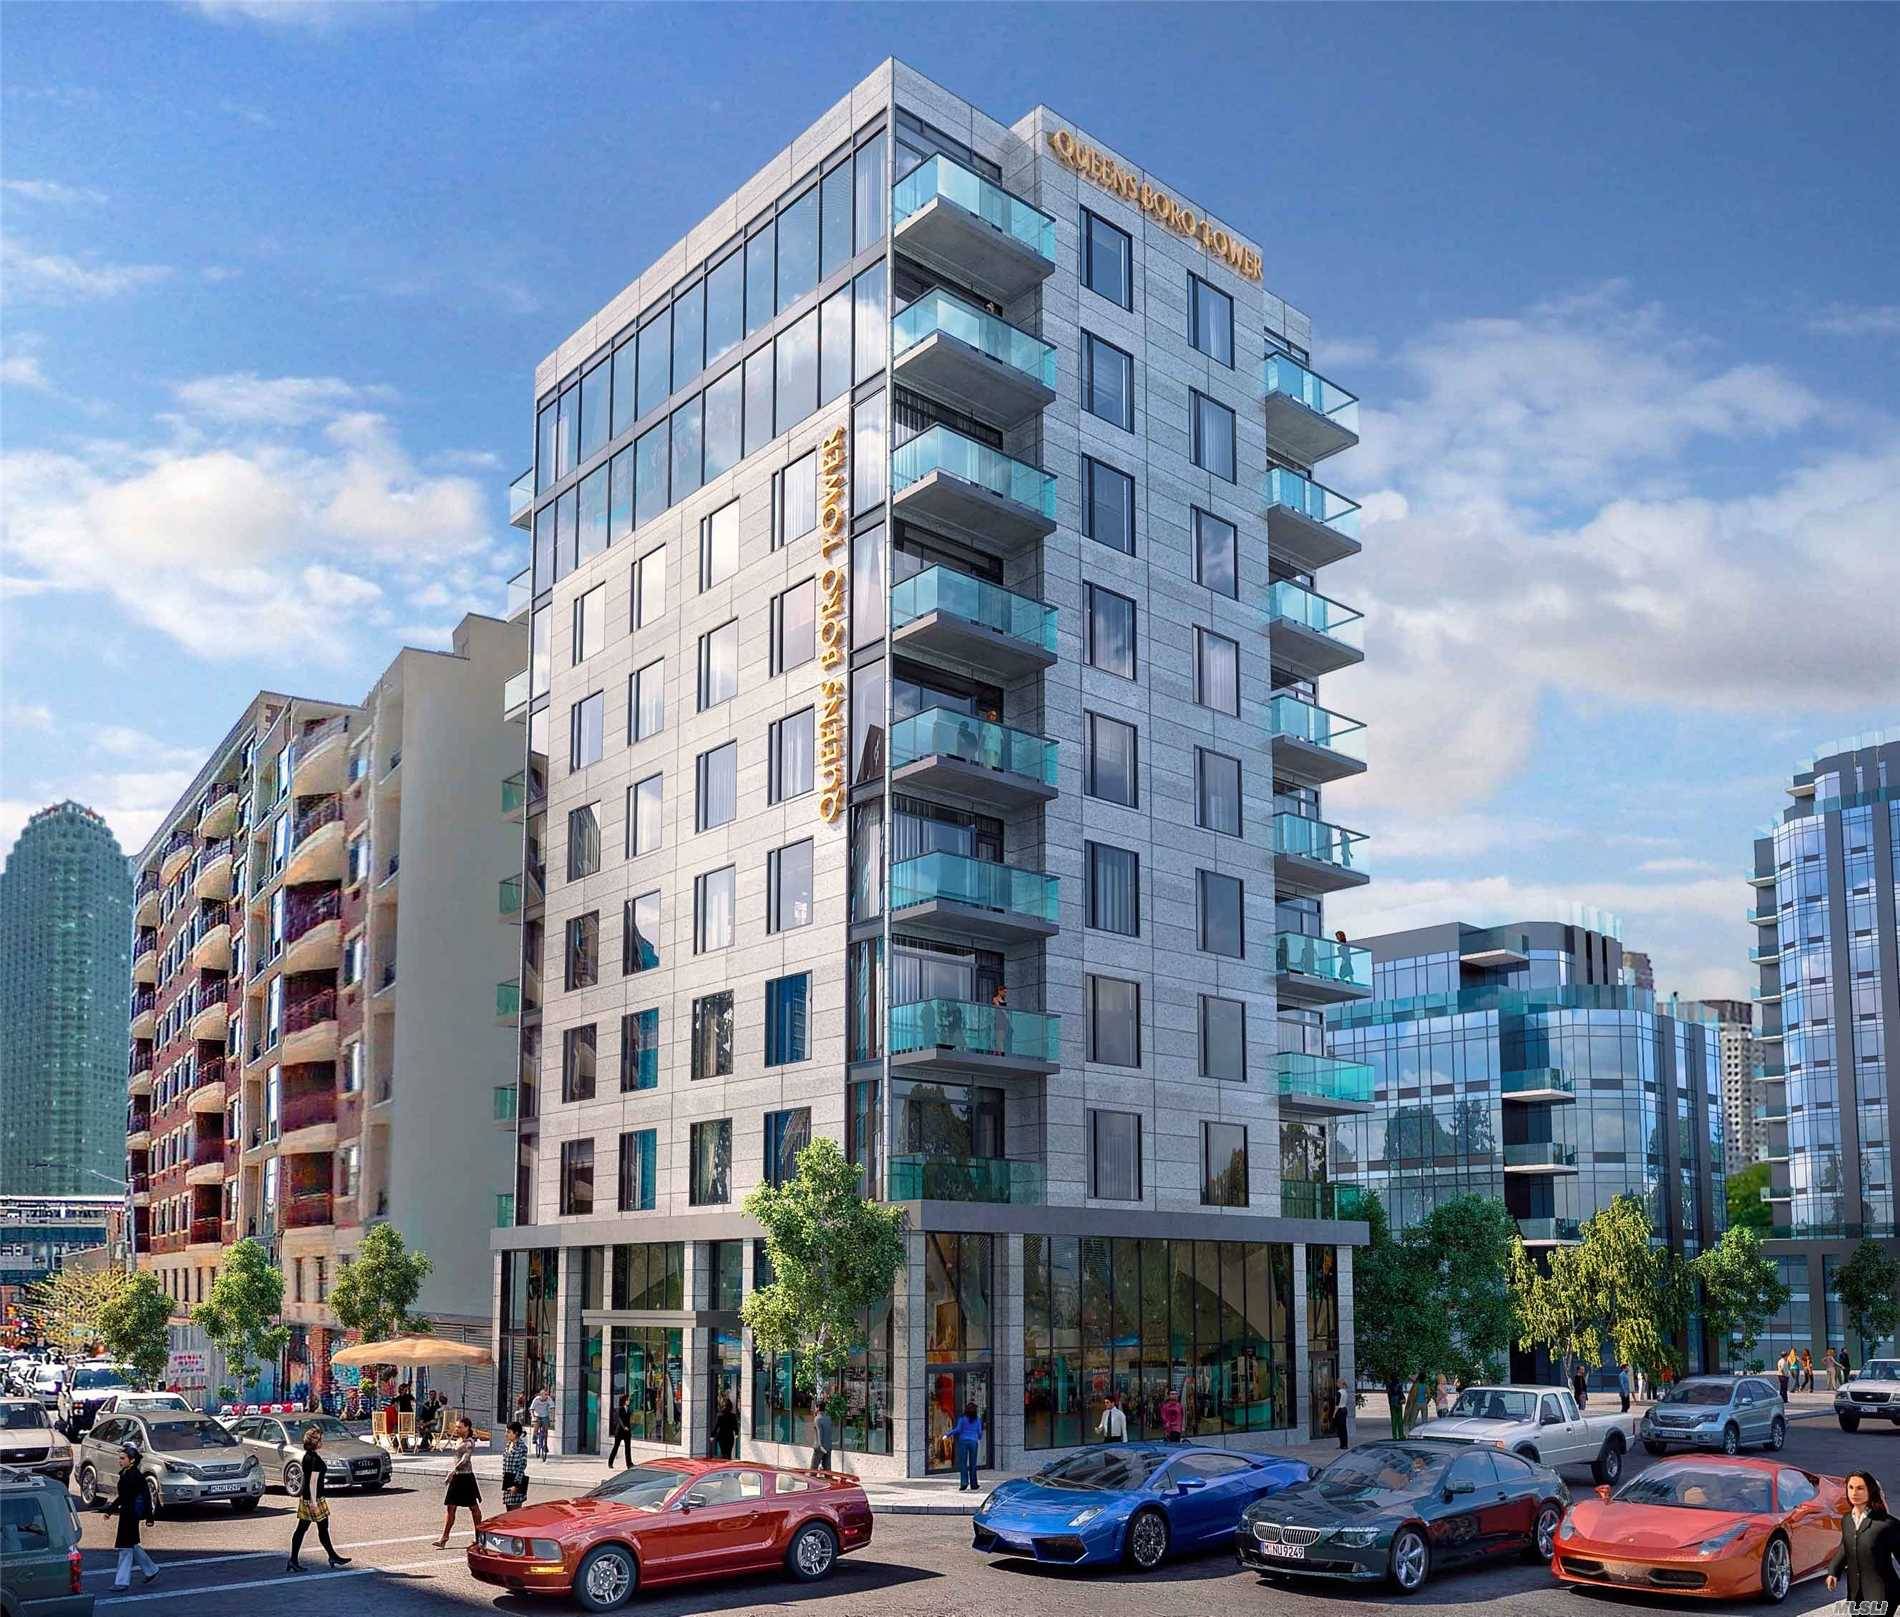 Brand new luxury development in the heart of Long Island City, located minutes away from the Queensboro Plaza station.